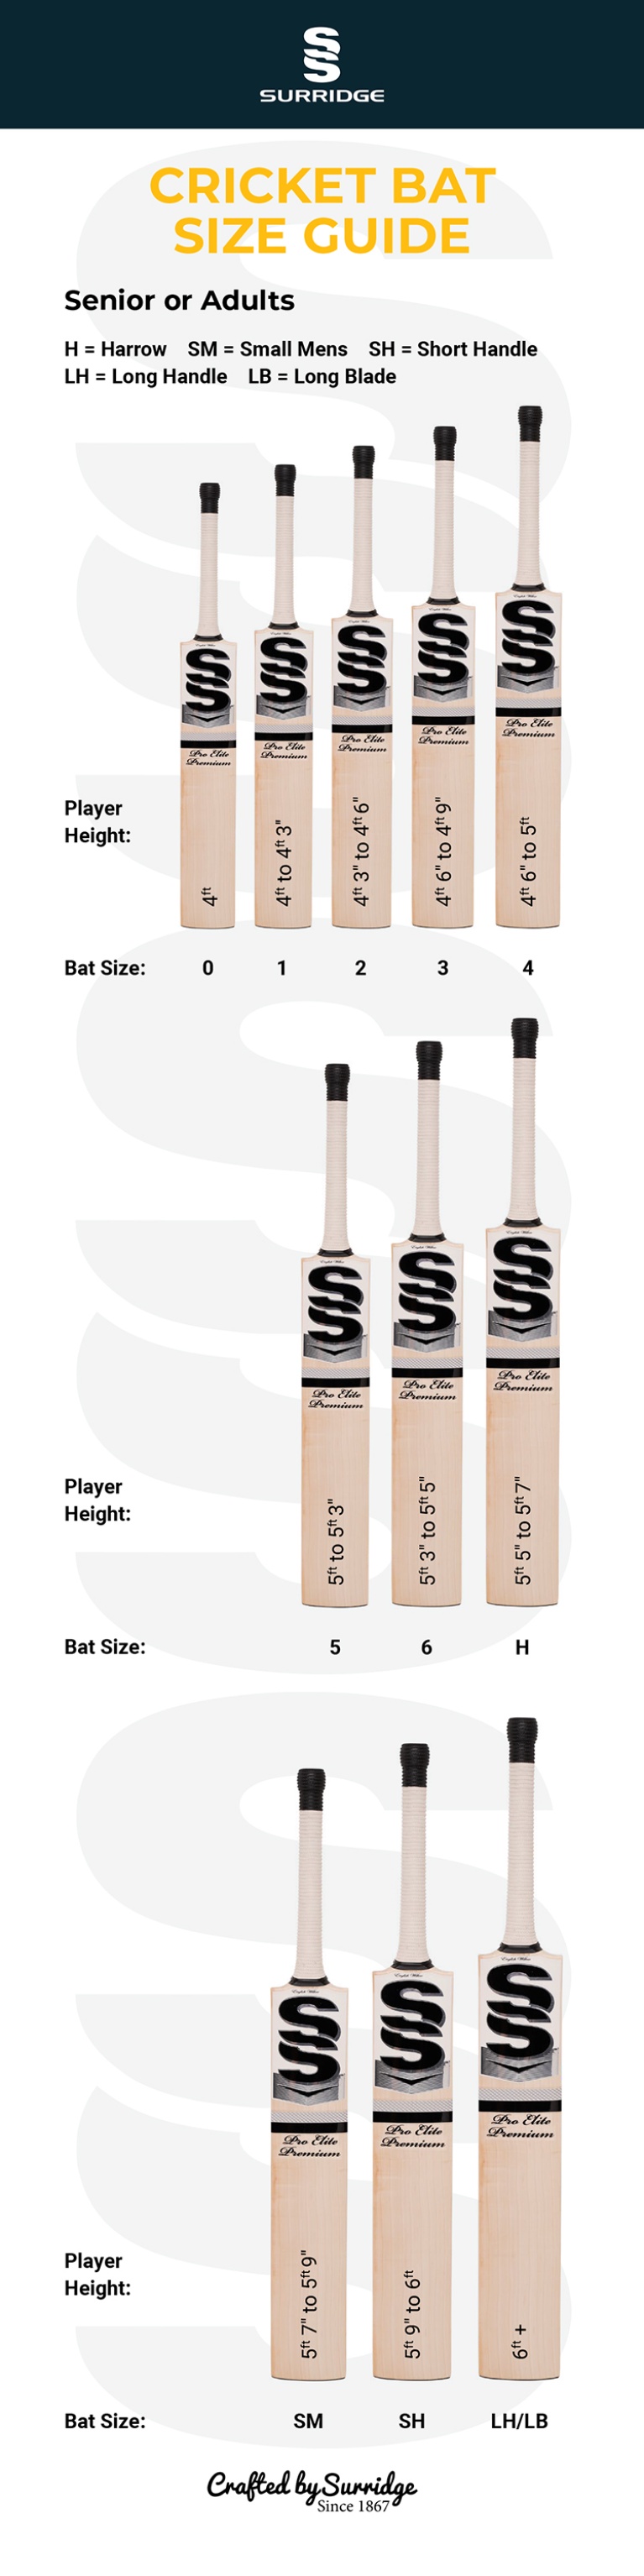 GRADE 1 CURVE ENGLISH WILLOW CRICKET BATS - Size Guide